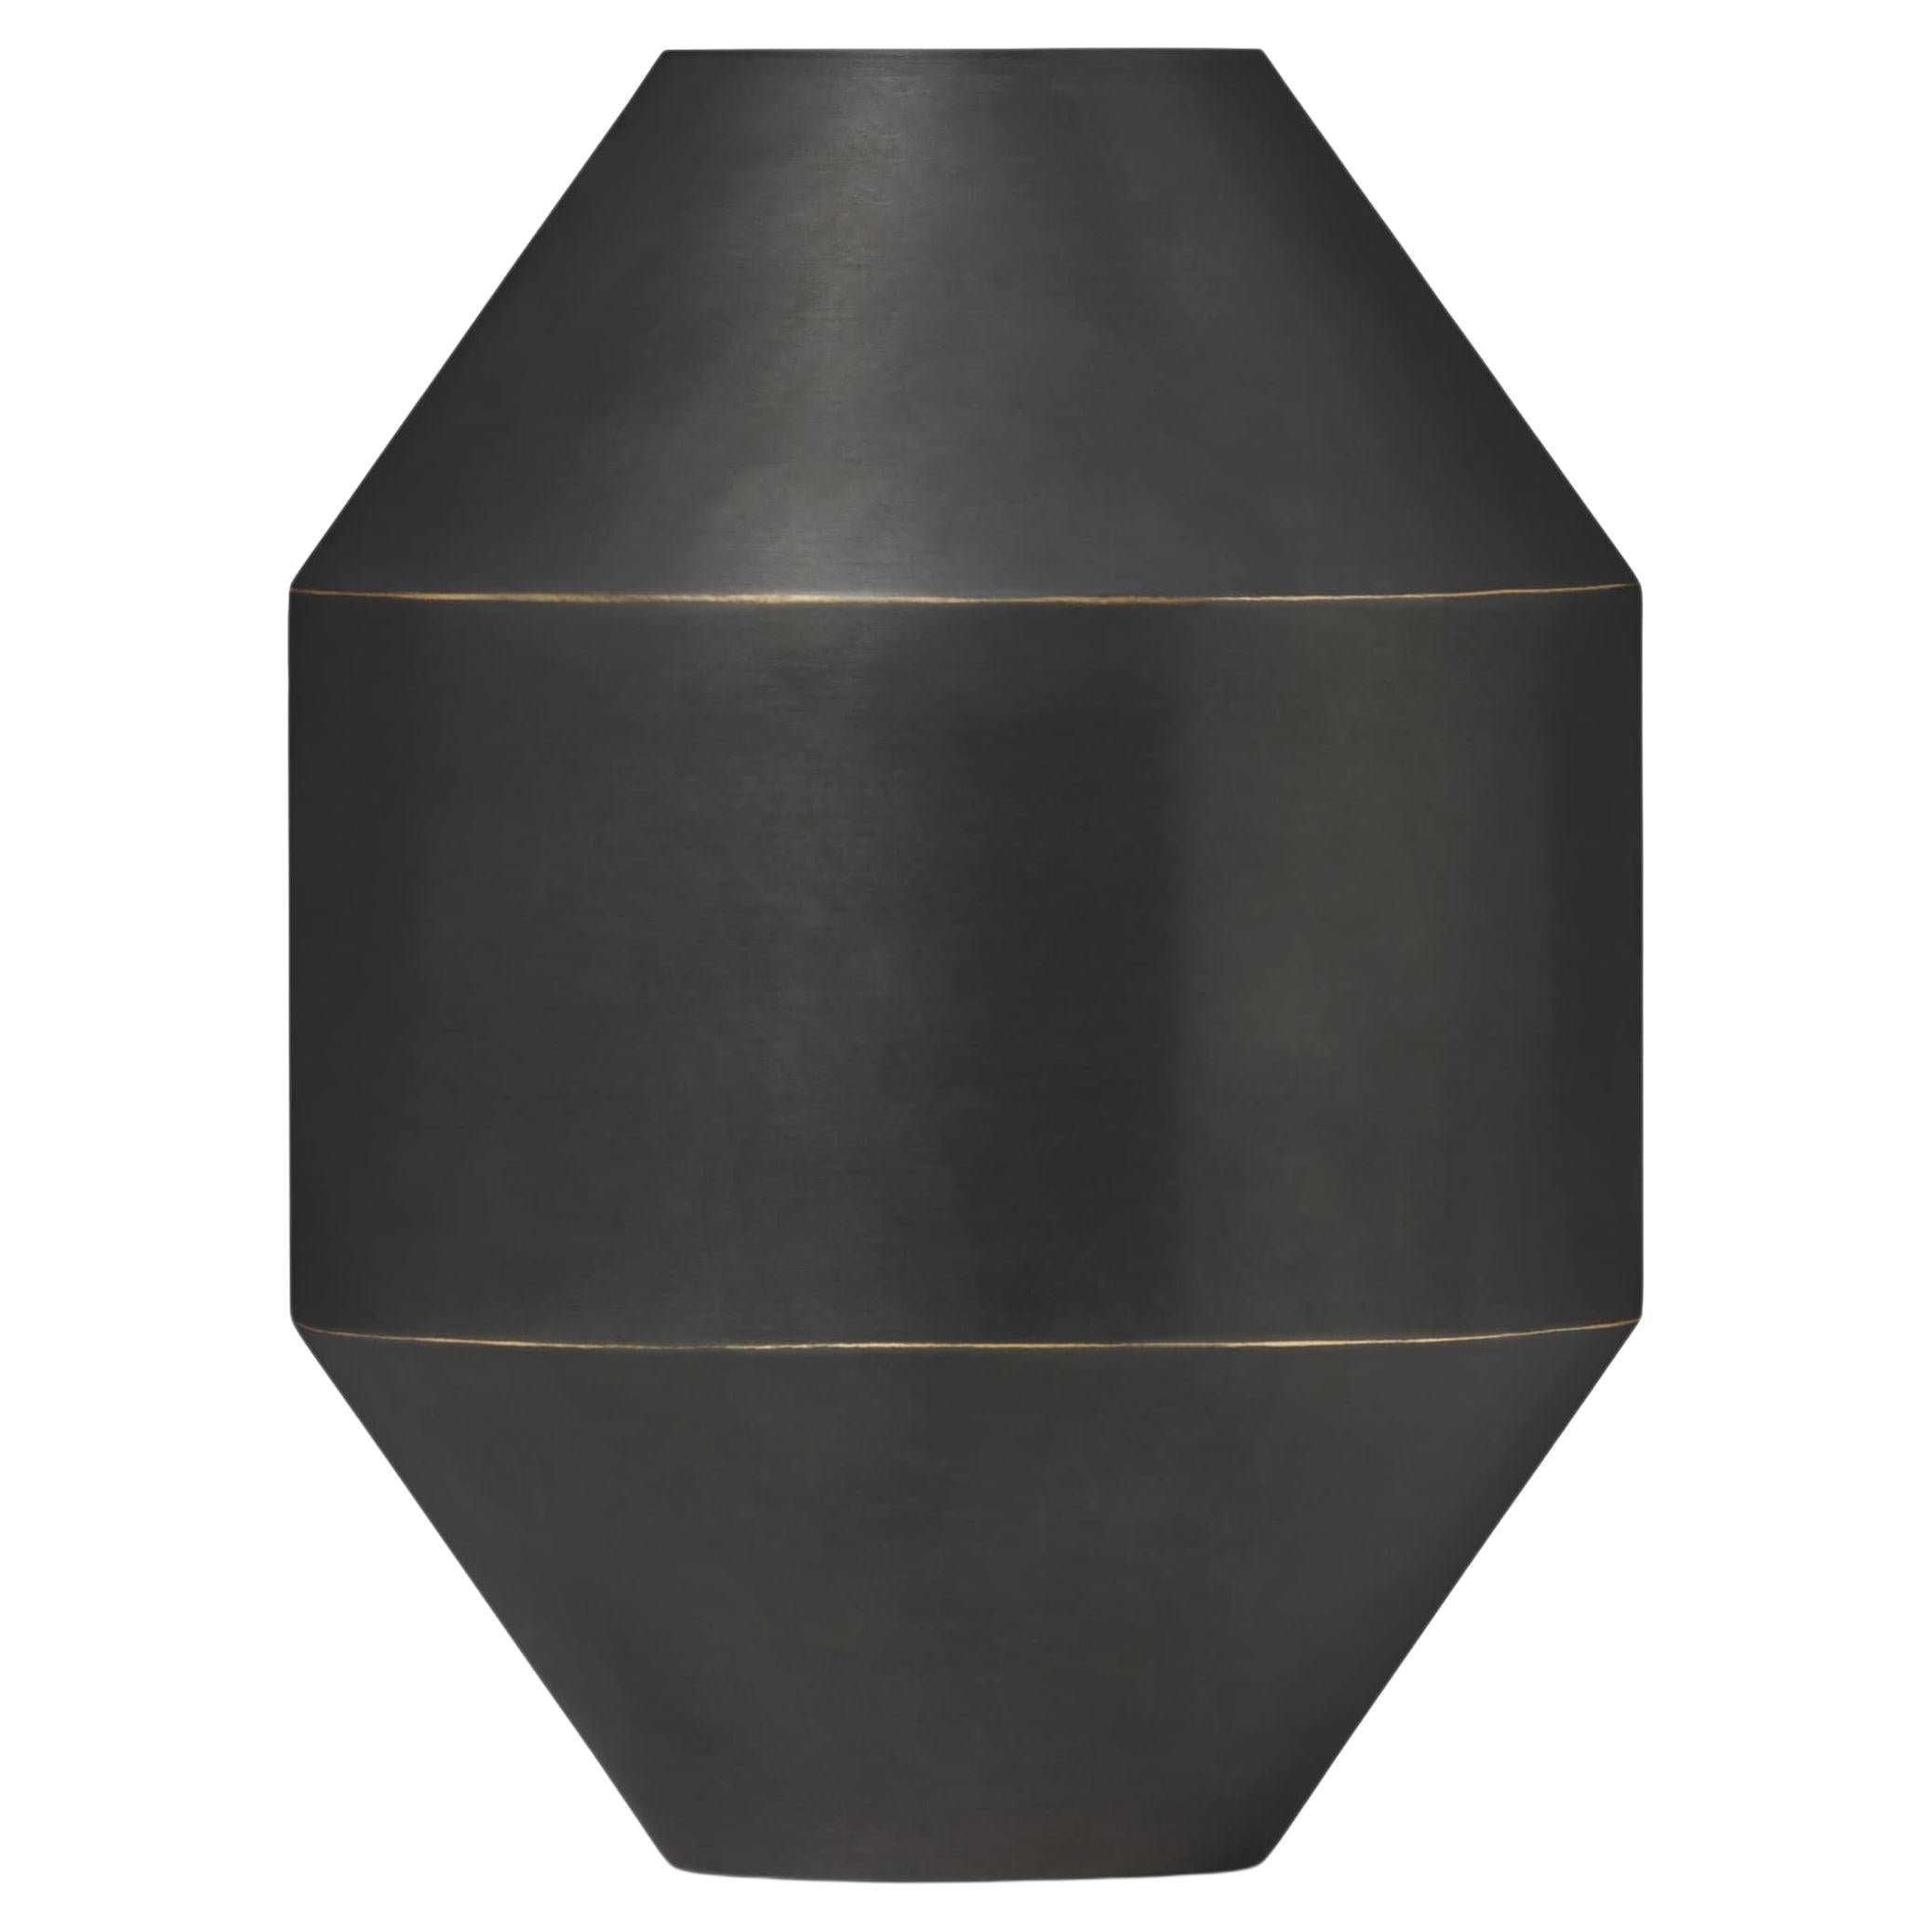  Hydro Vase H20 Black-Oxide Brass by Sofie Østerby for Fredericia For Sale